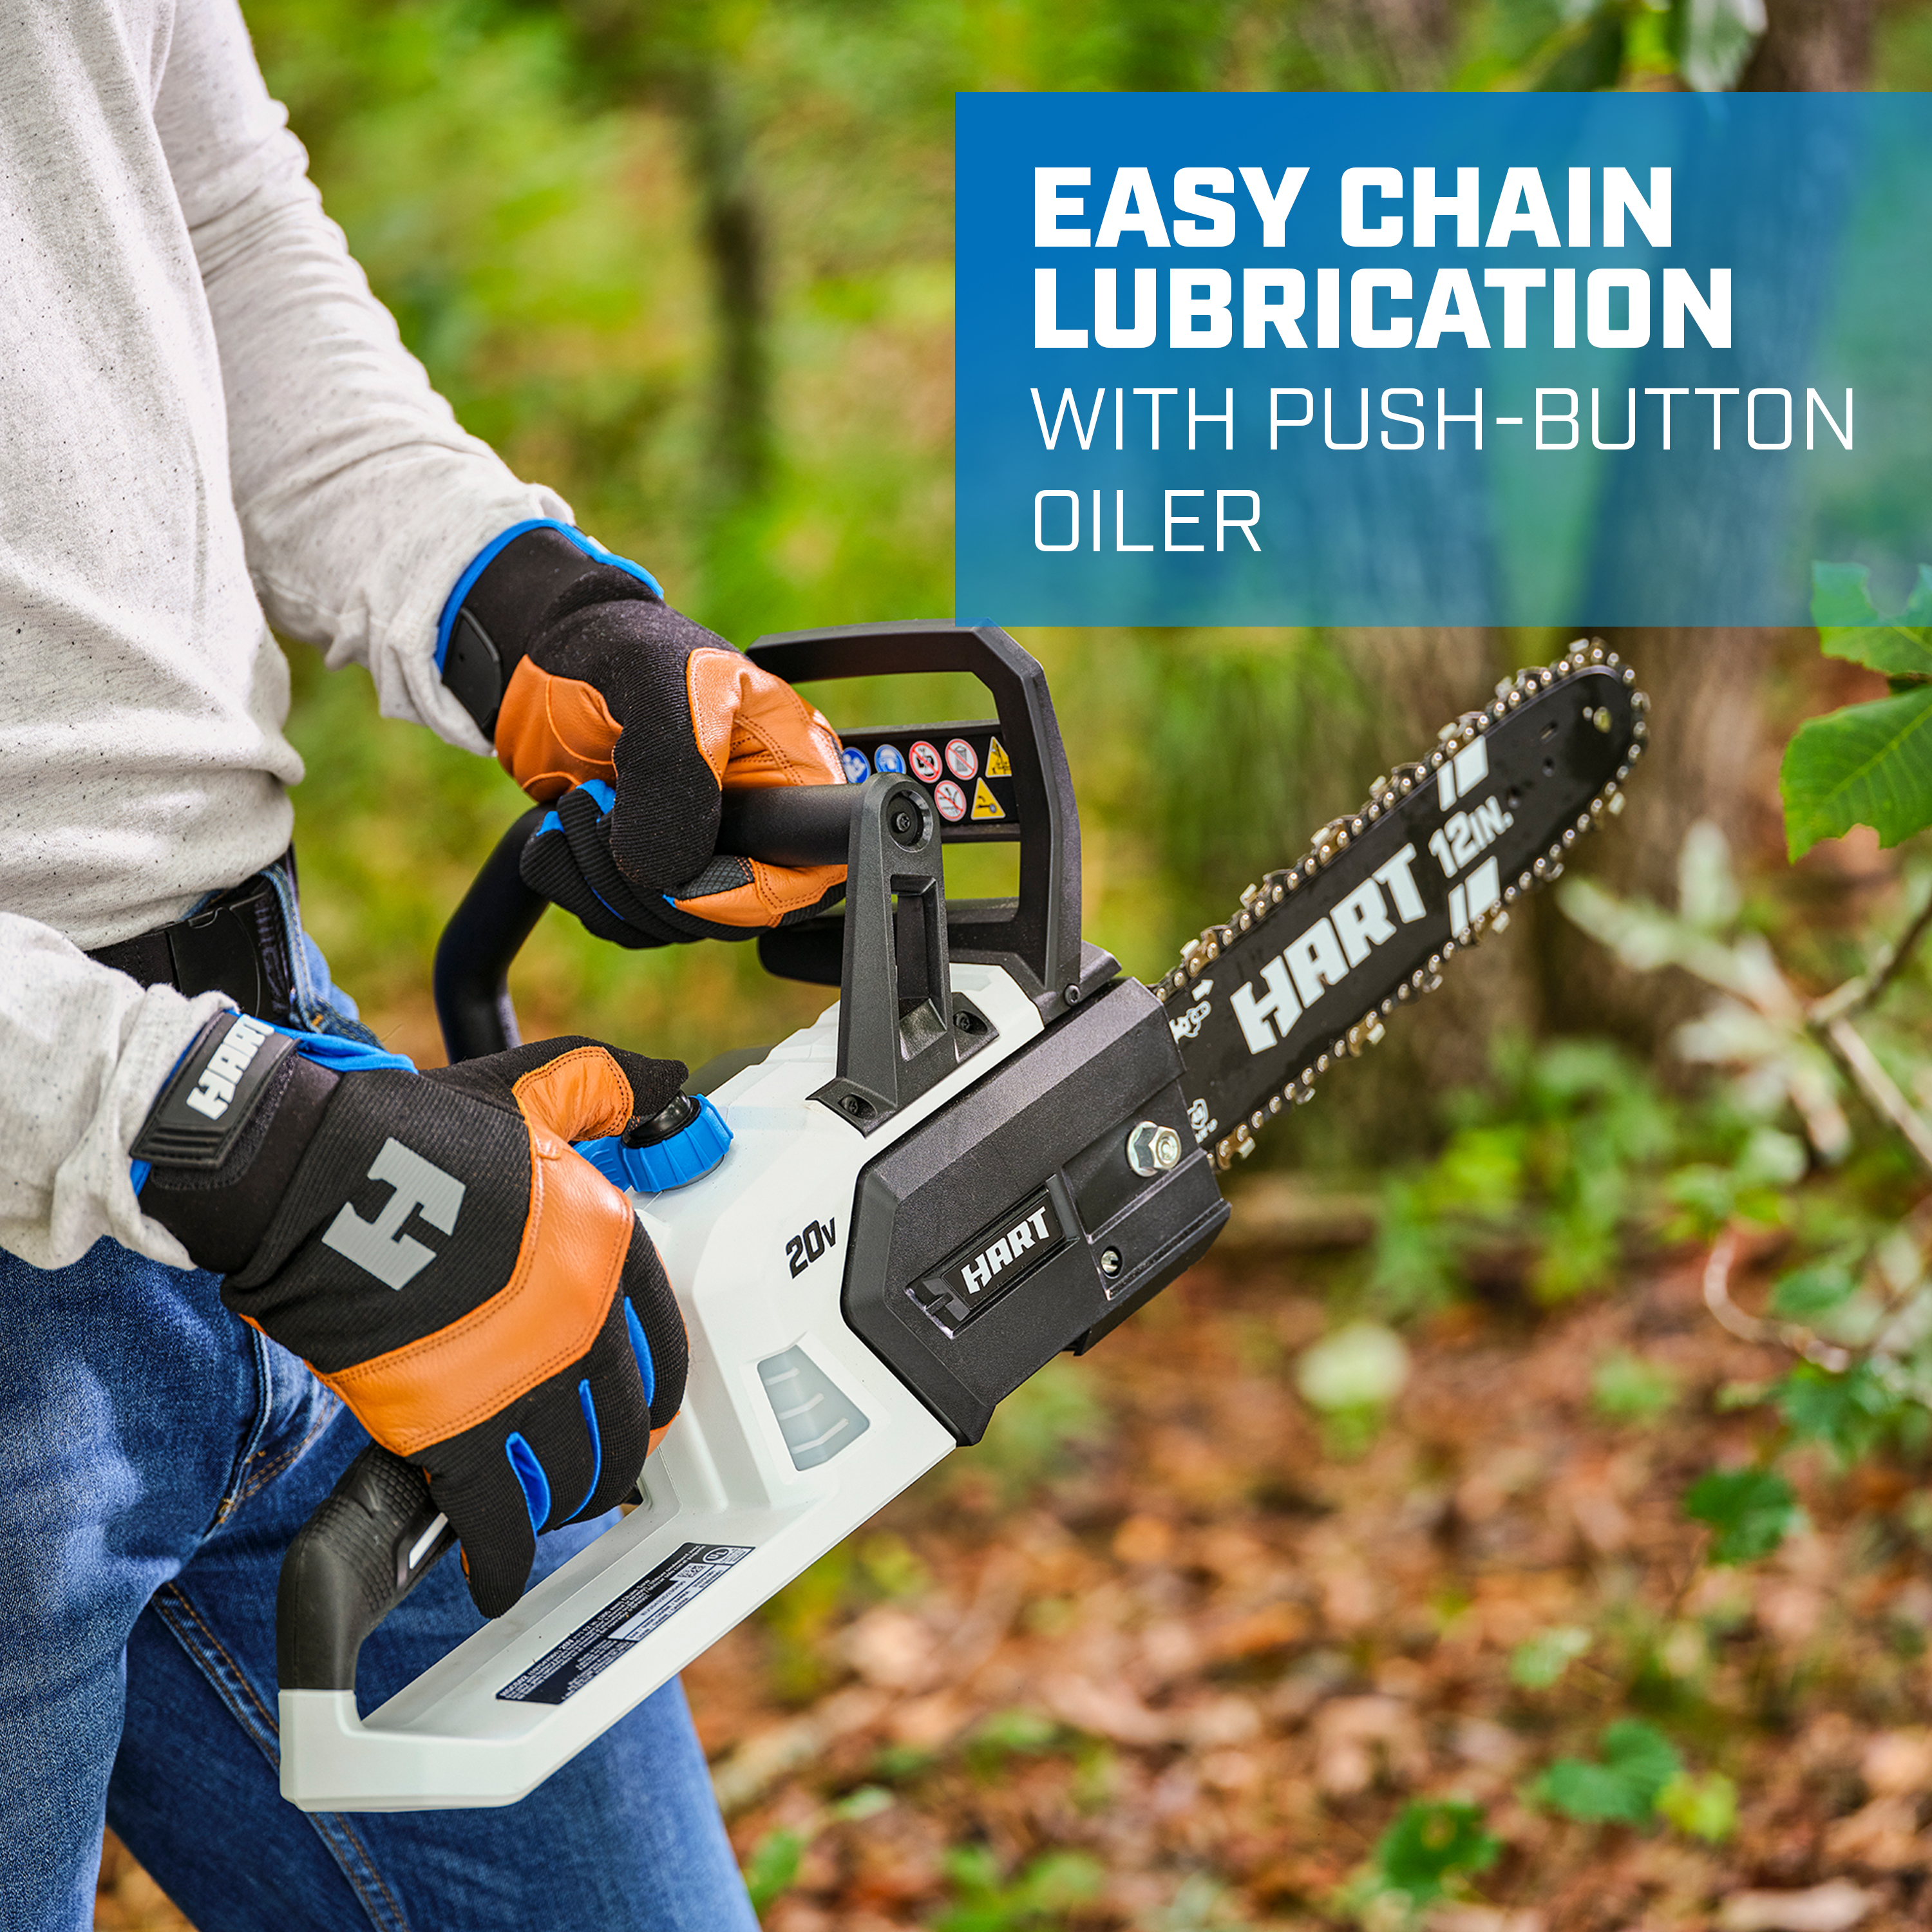 Easy Chain Lubrication with Push-Button Oiler